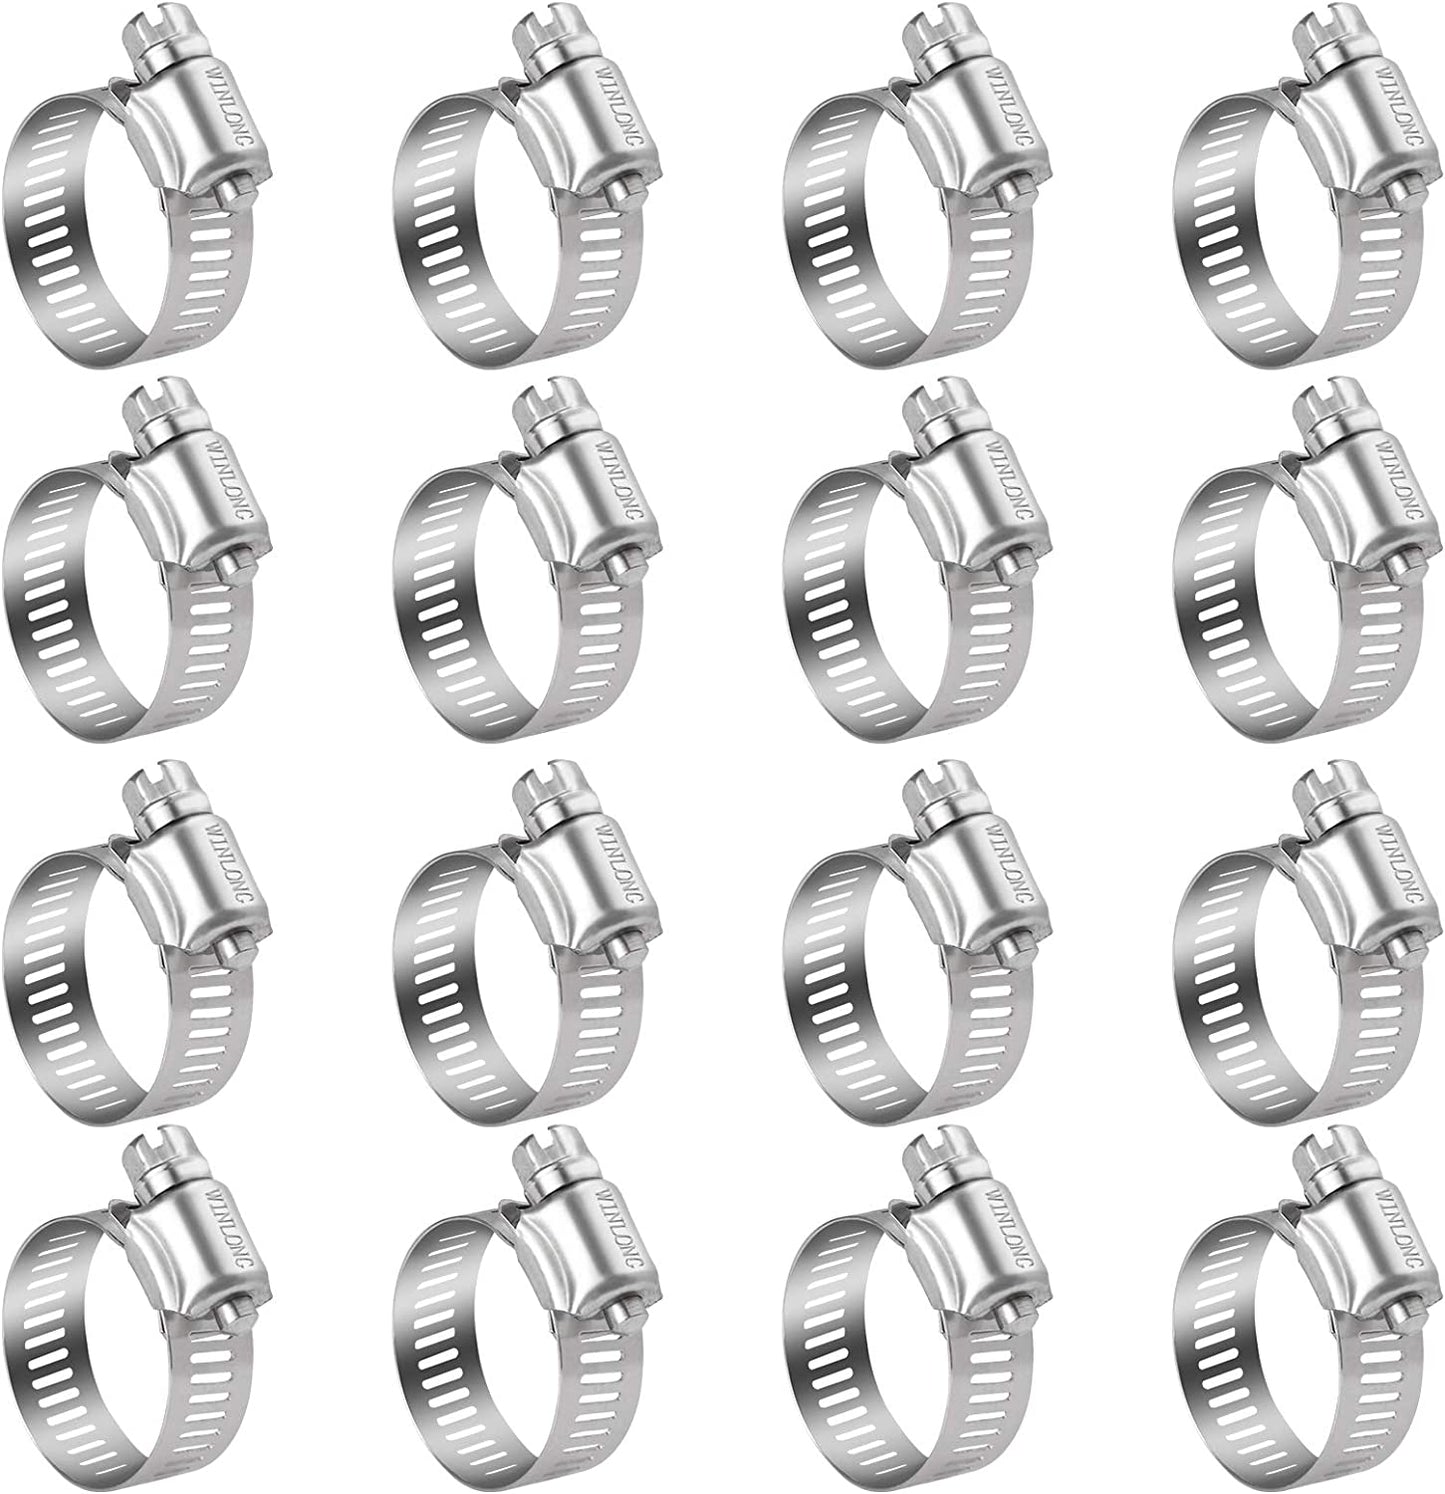 Stainless Steel Hose Clamps - 16 Pack Worm Gear Drive Hose Clamps SAE 12 Clamping Range of 1/2'' to 1-1/4'' (14Mm-31Mm) for Automotive Plumbing, 1/2 Inch, 3/4 Inch, 1 Inch Hose Clamps